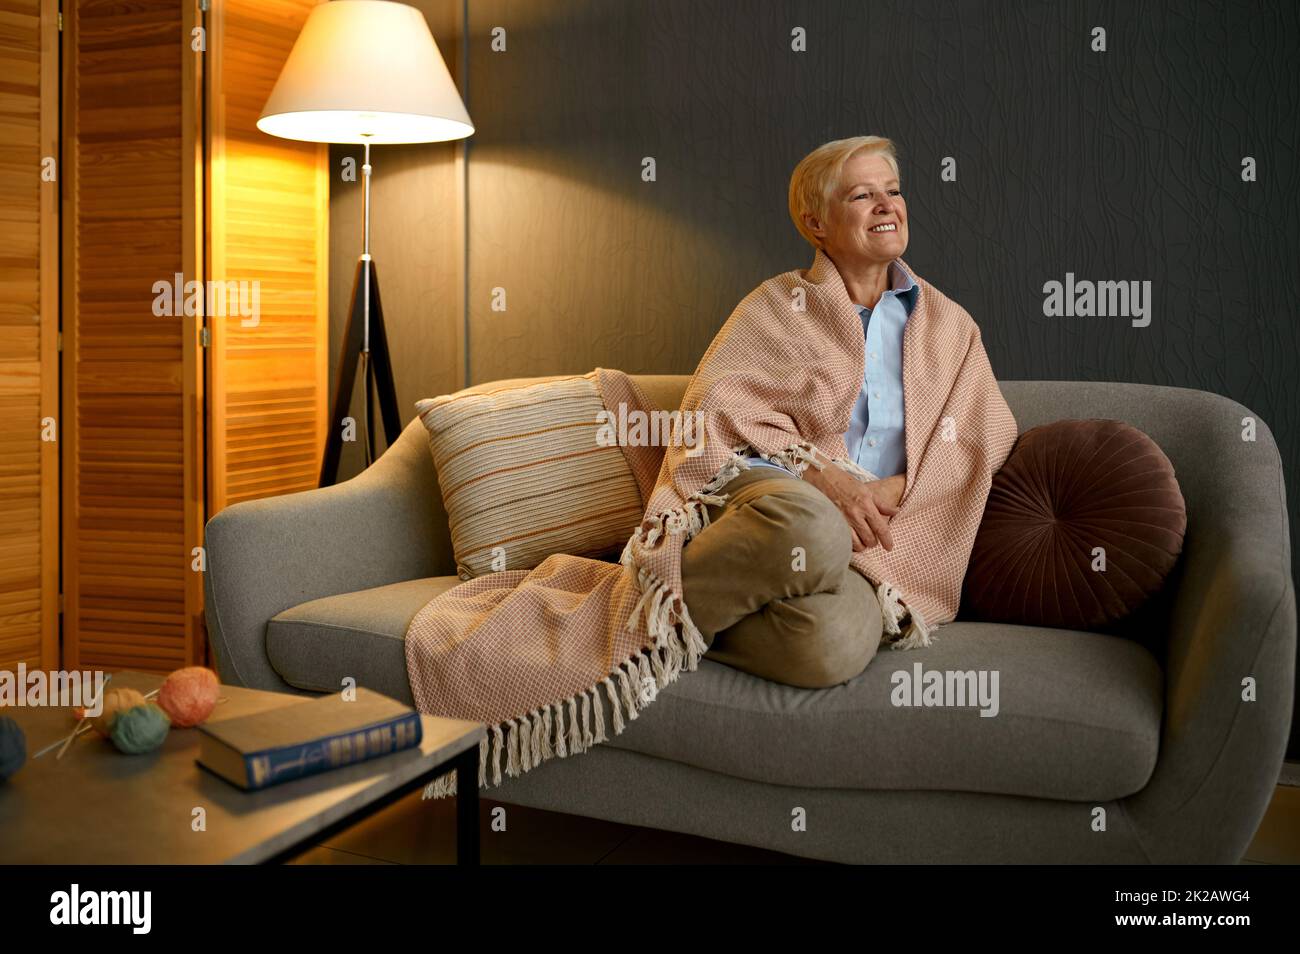 Satisfied old woman wrapped in blanket relaxing Stock Photo